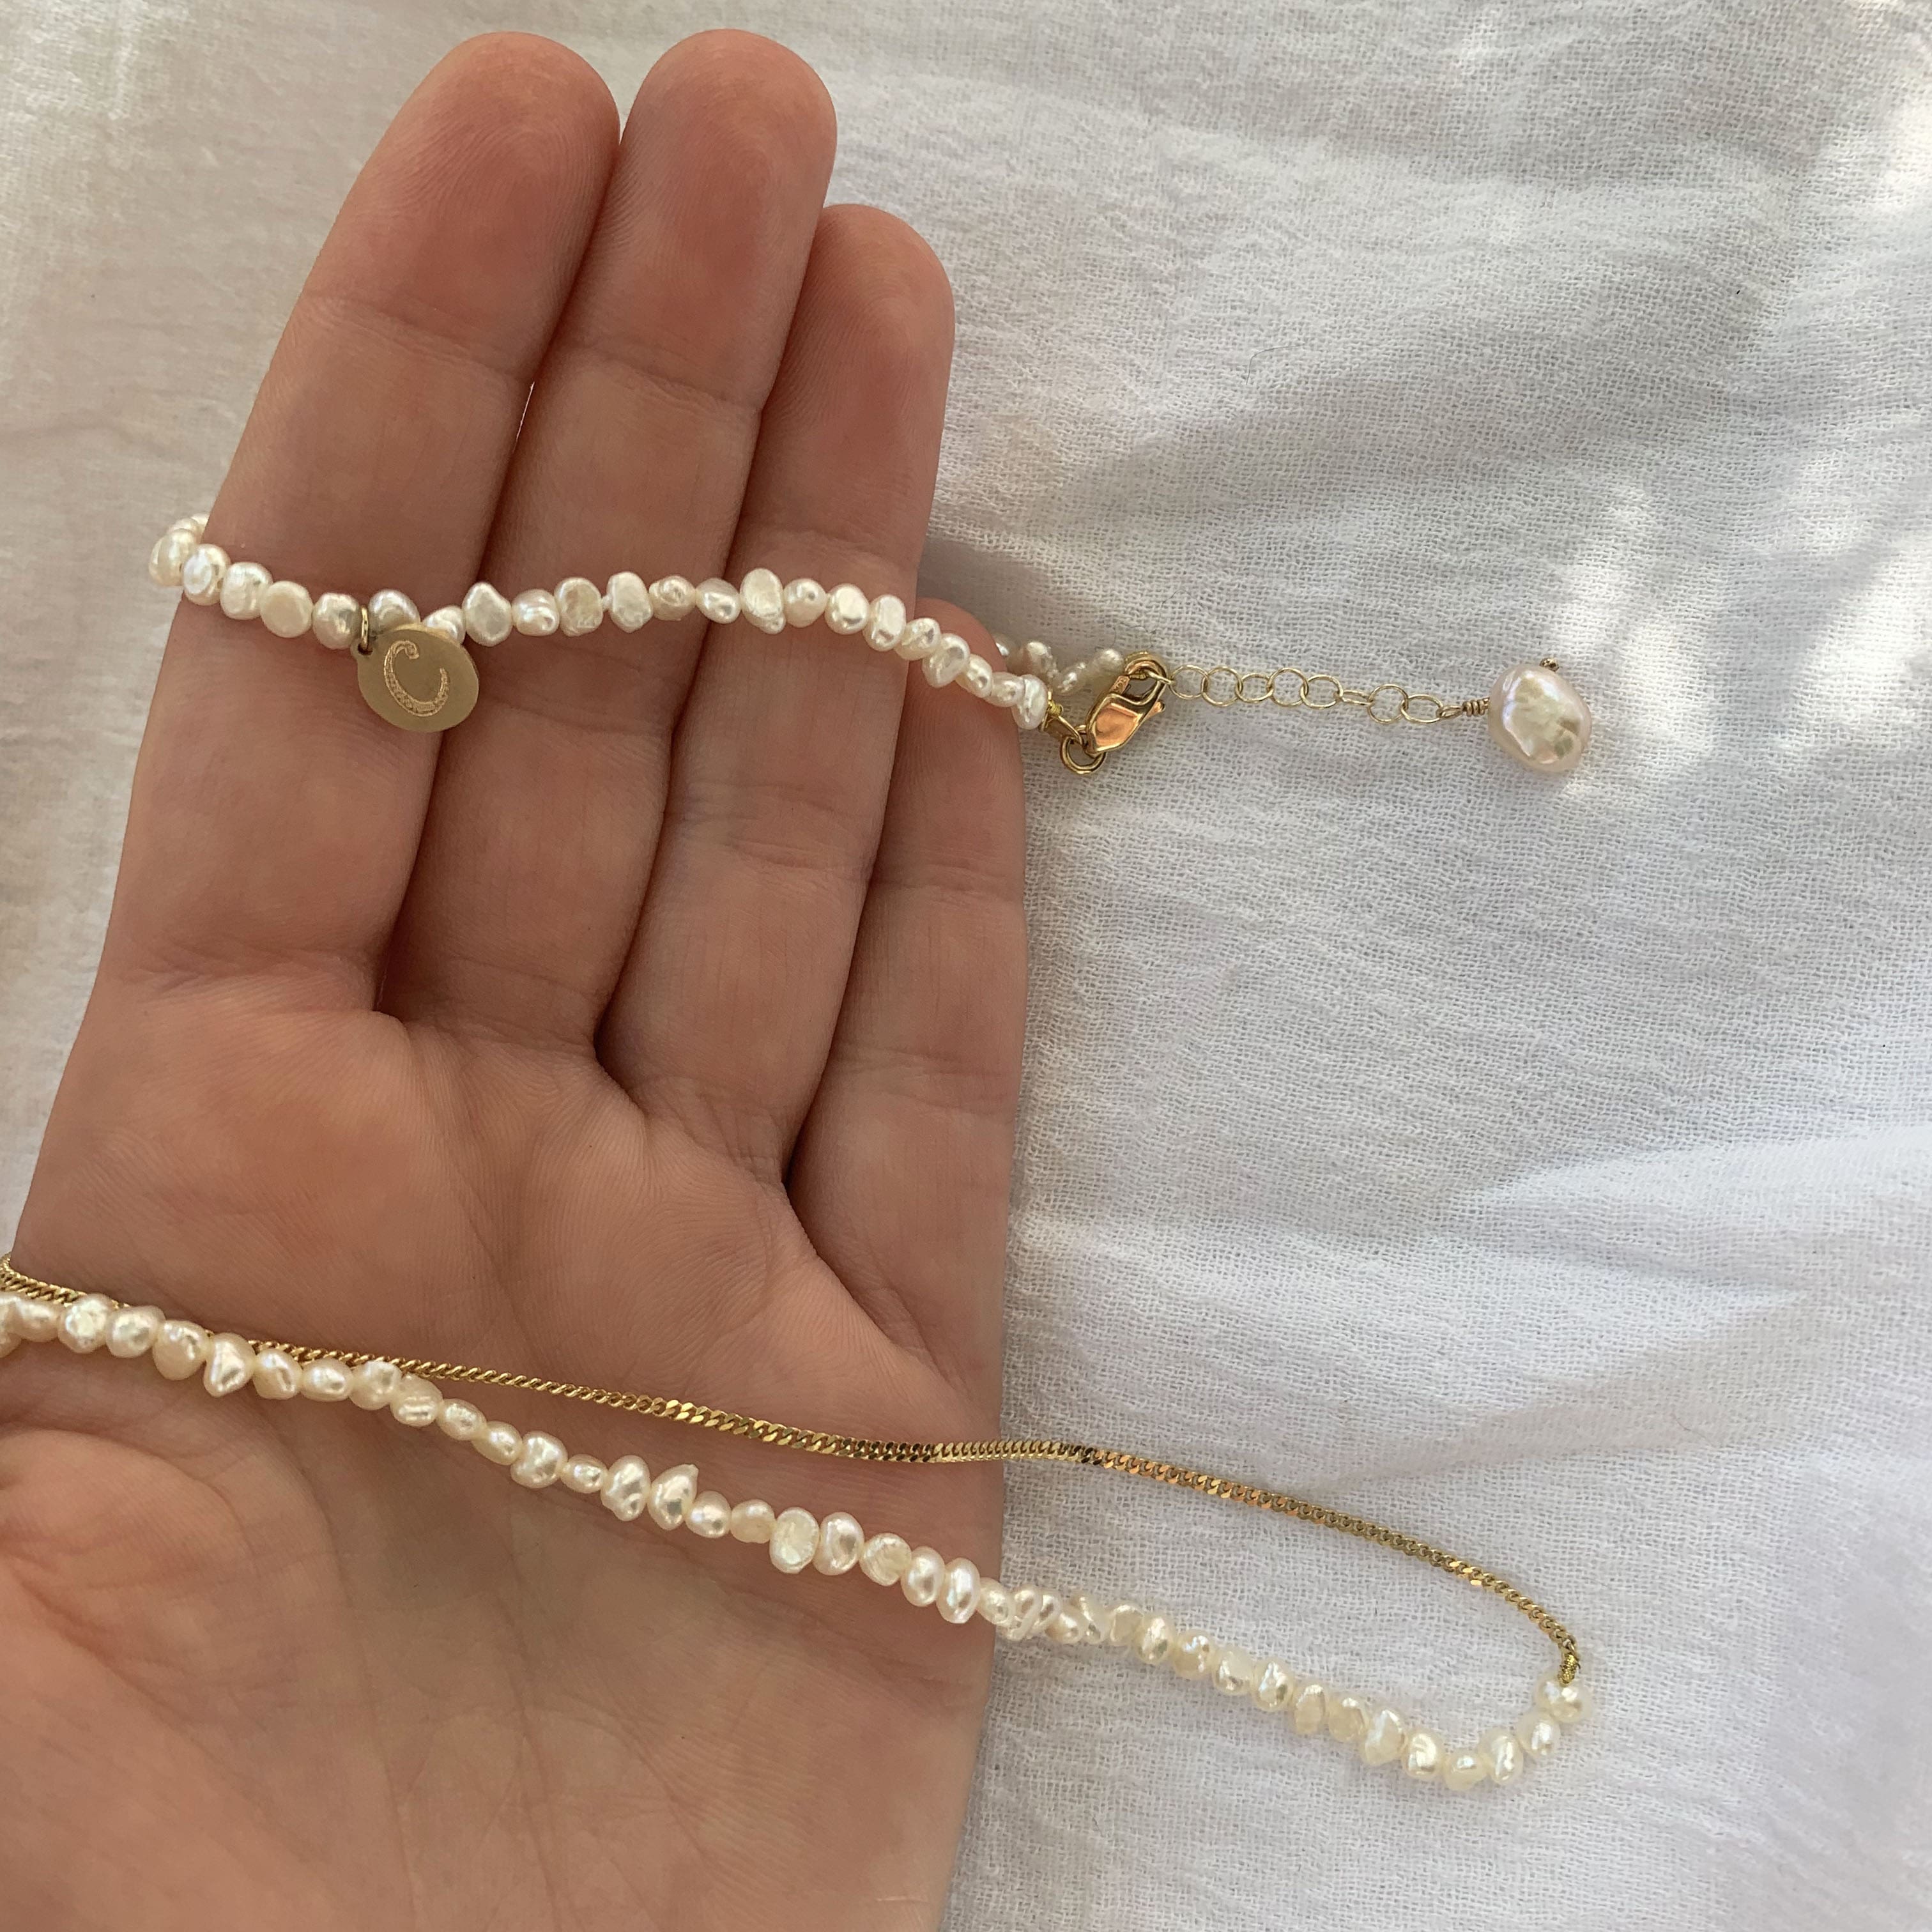 14k Gold Pearl Bracelet with Engravable Coin